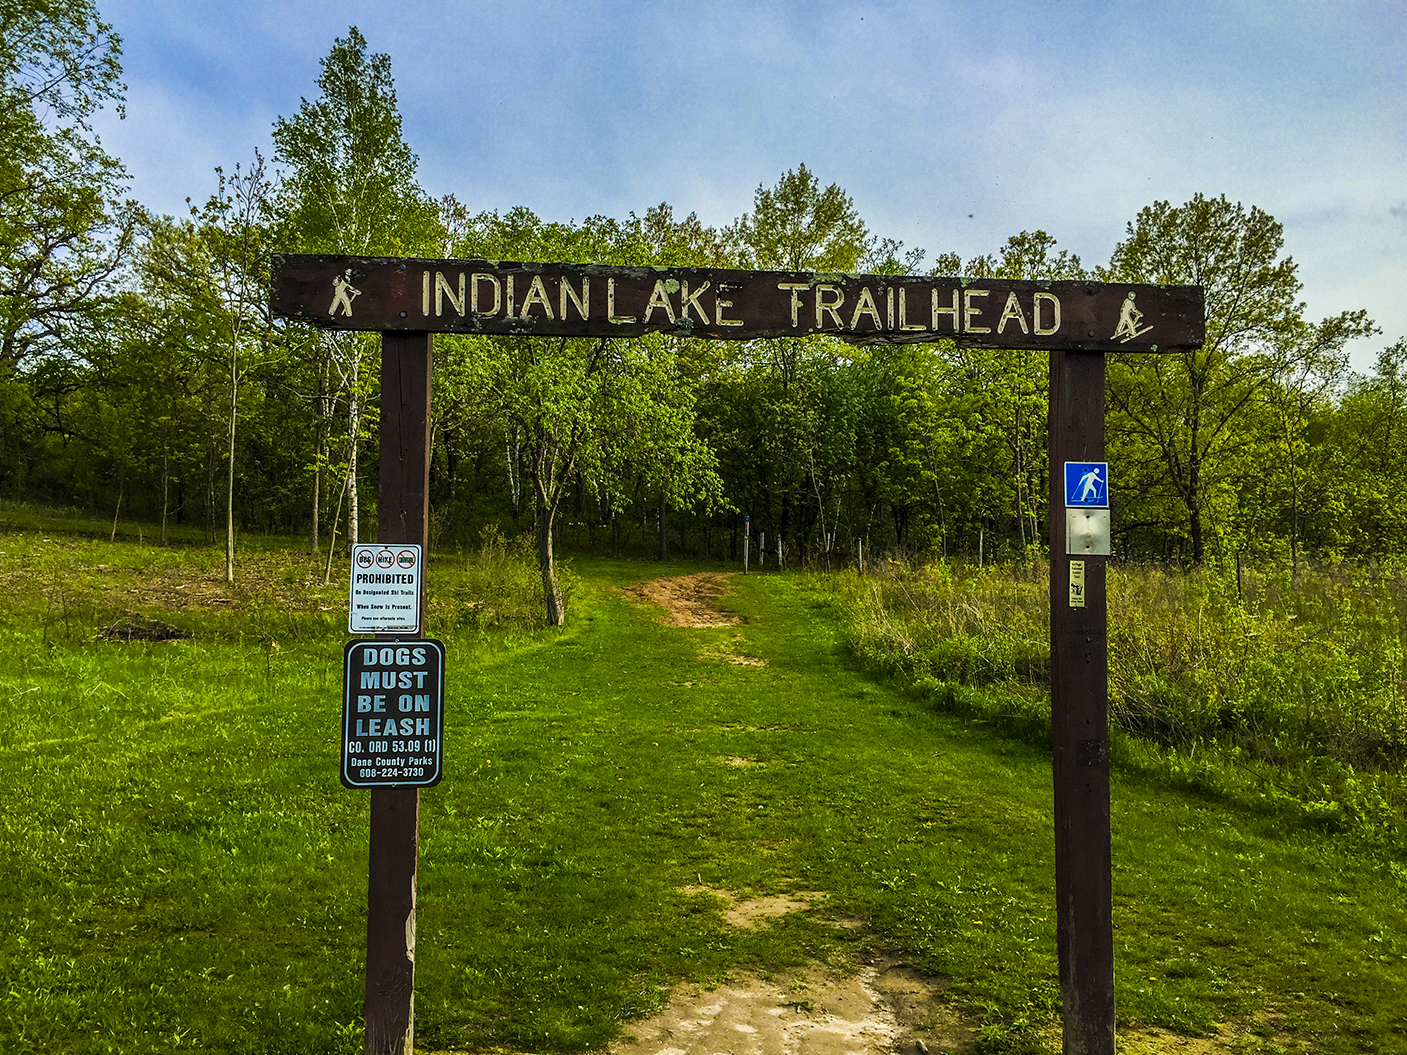 The Ice Age Trail at Indian Lake County Park in Dane WI